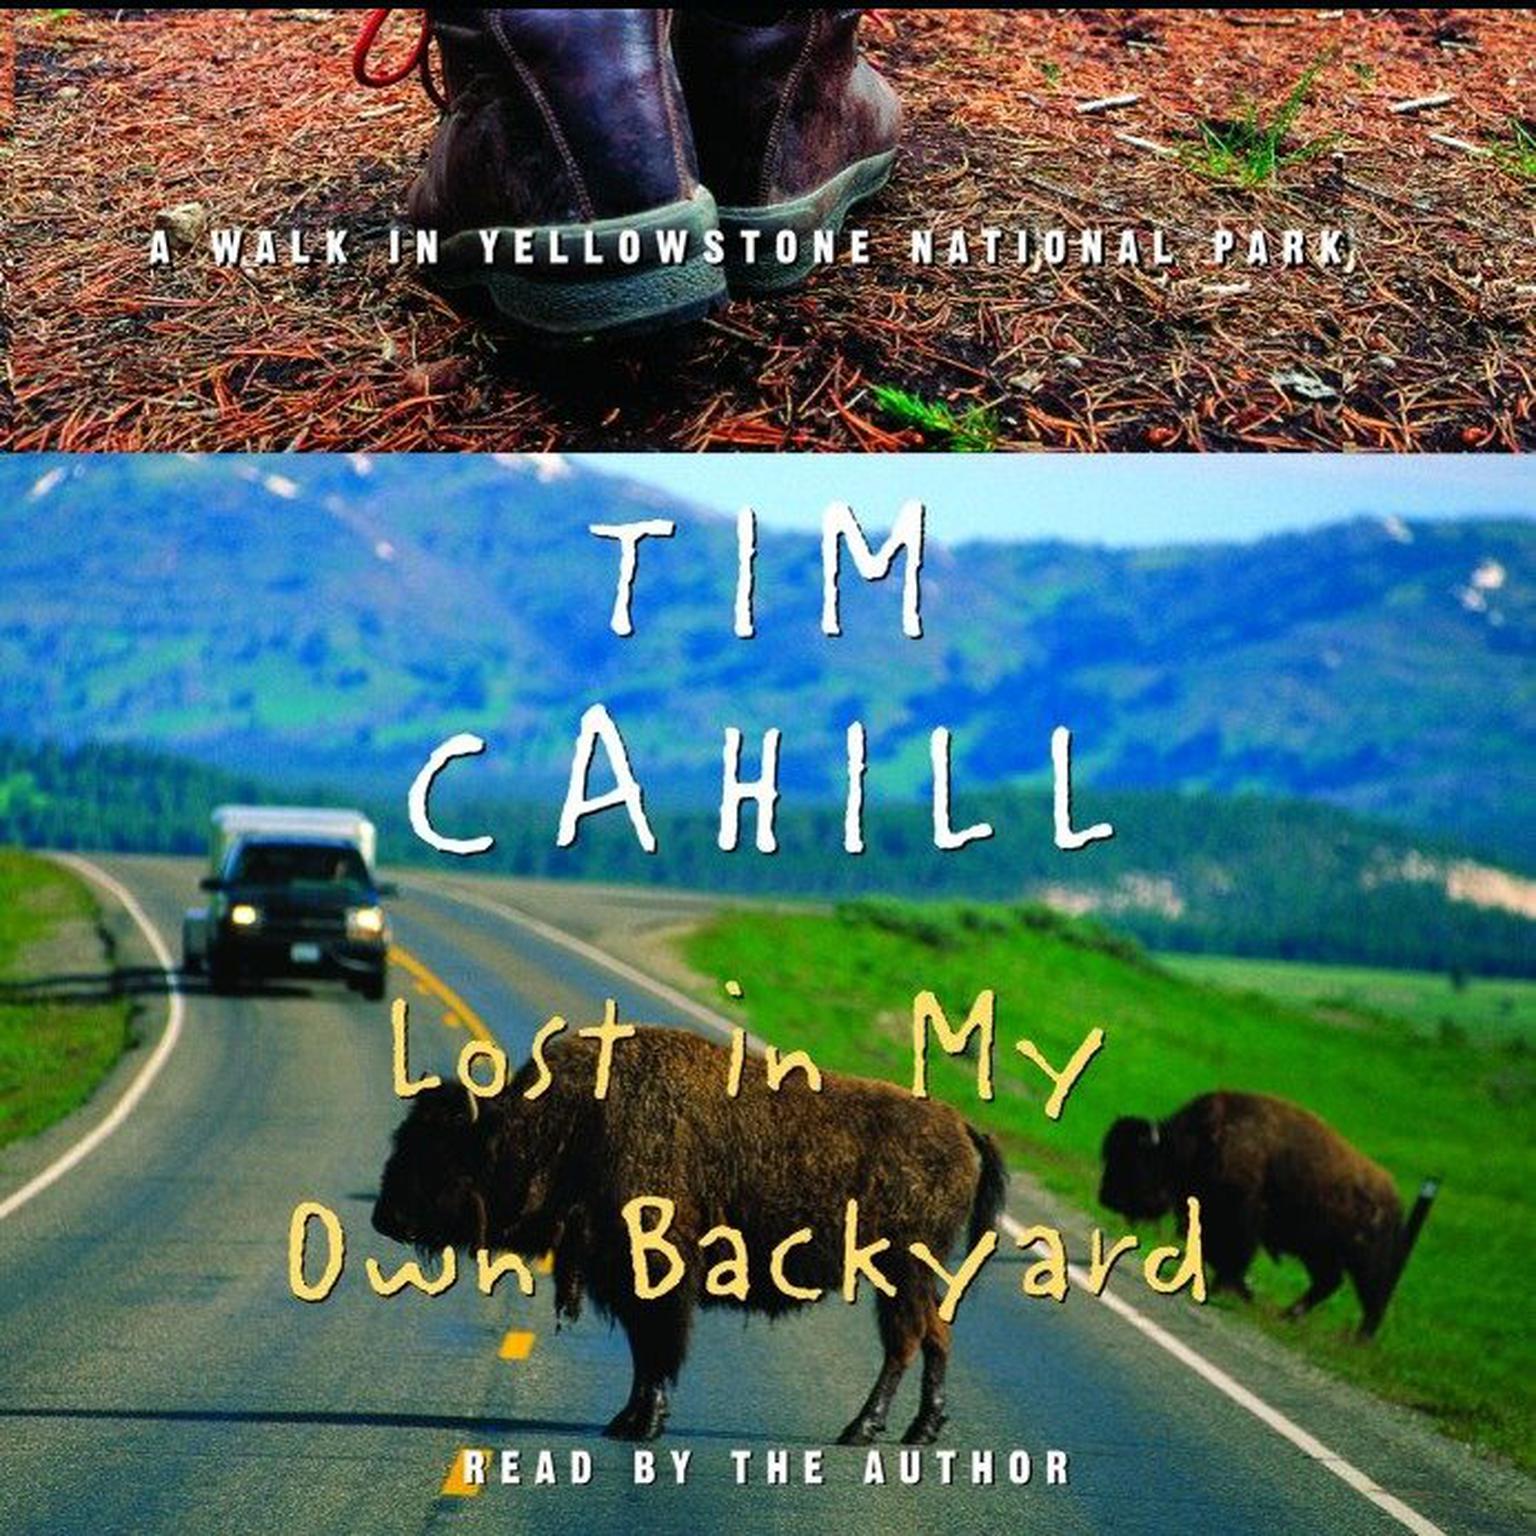 Lost In My Own Backyard (Abridged): A Walk in Yellowstone National Park Audiobook, by Tim Cahill